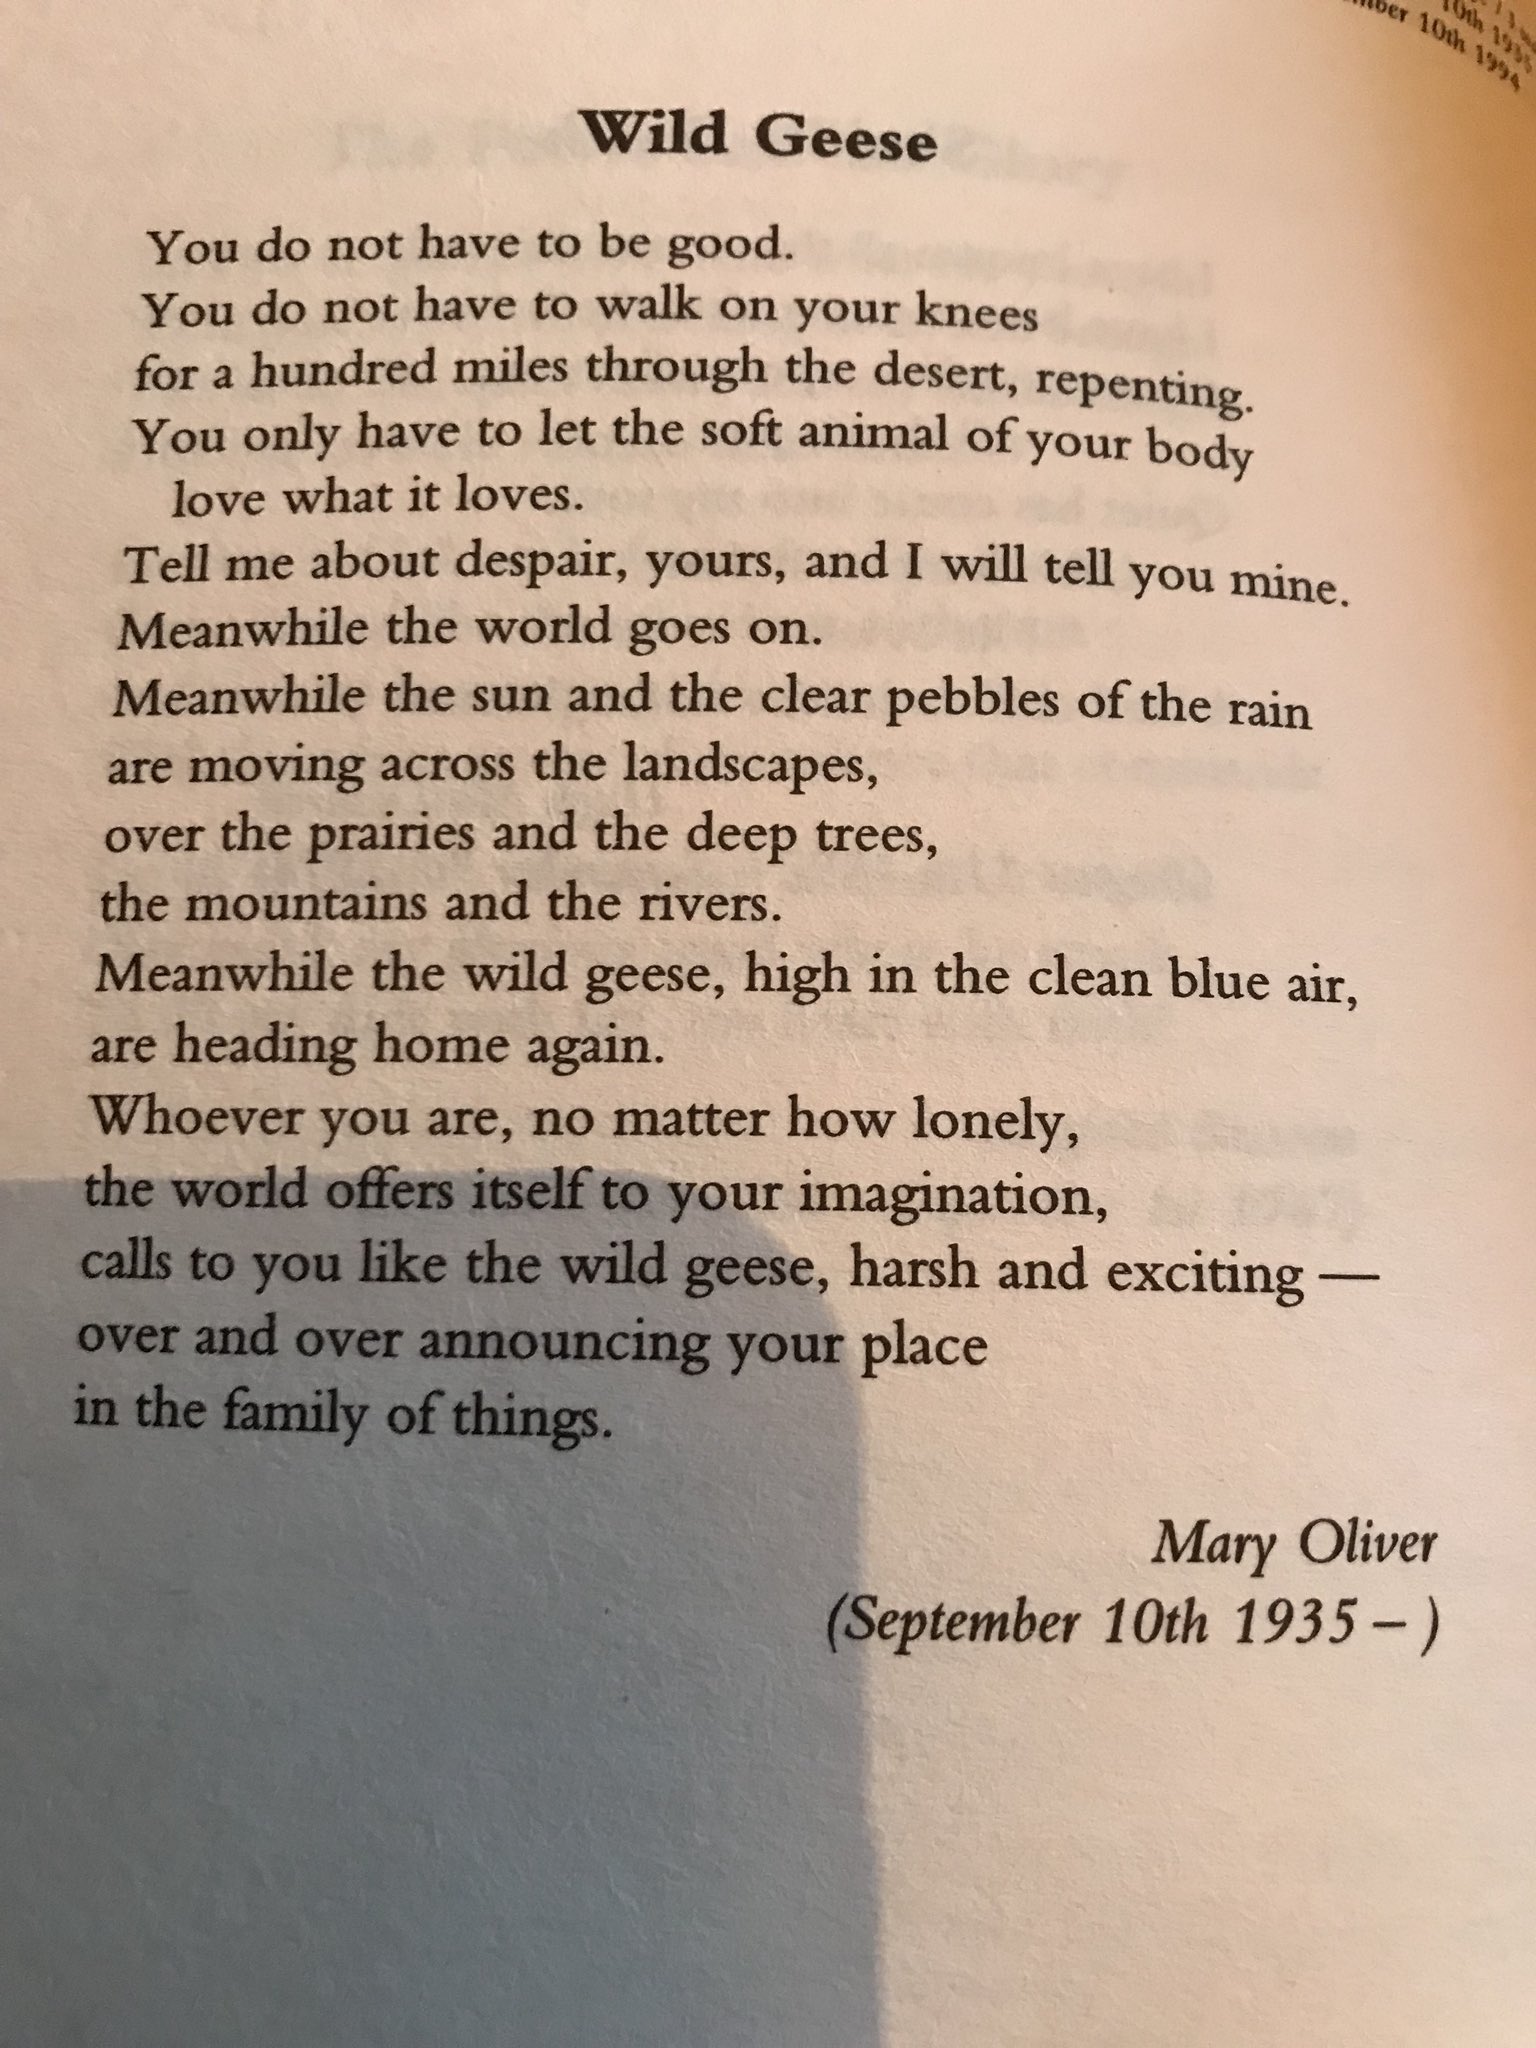 mary oliver geese